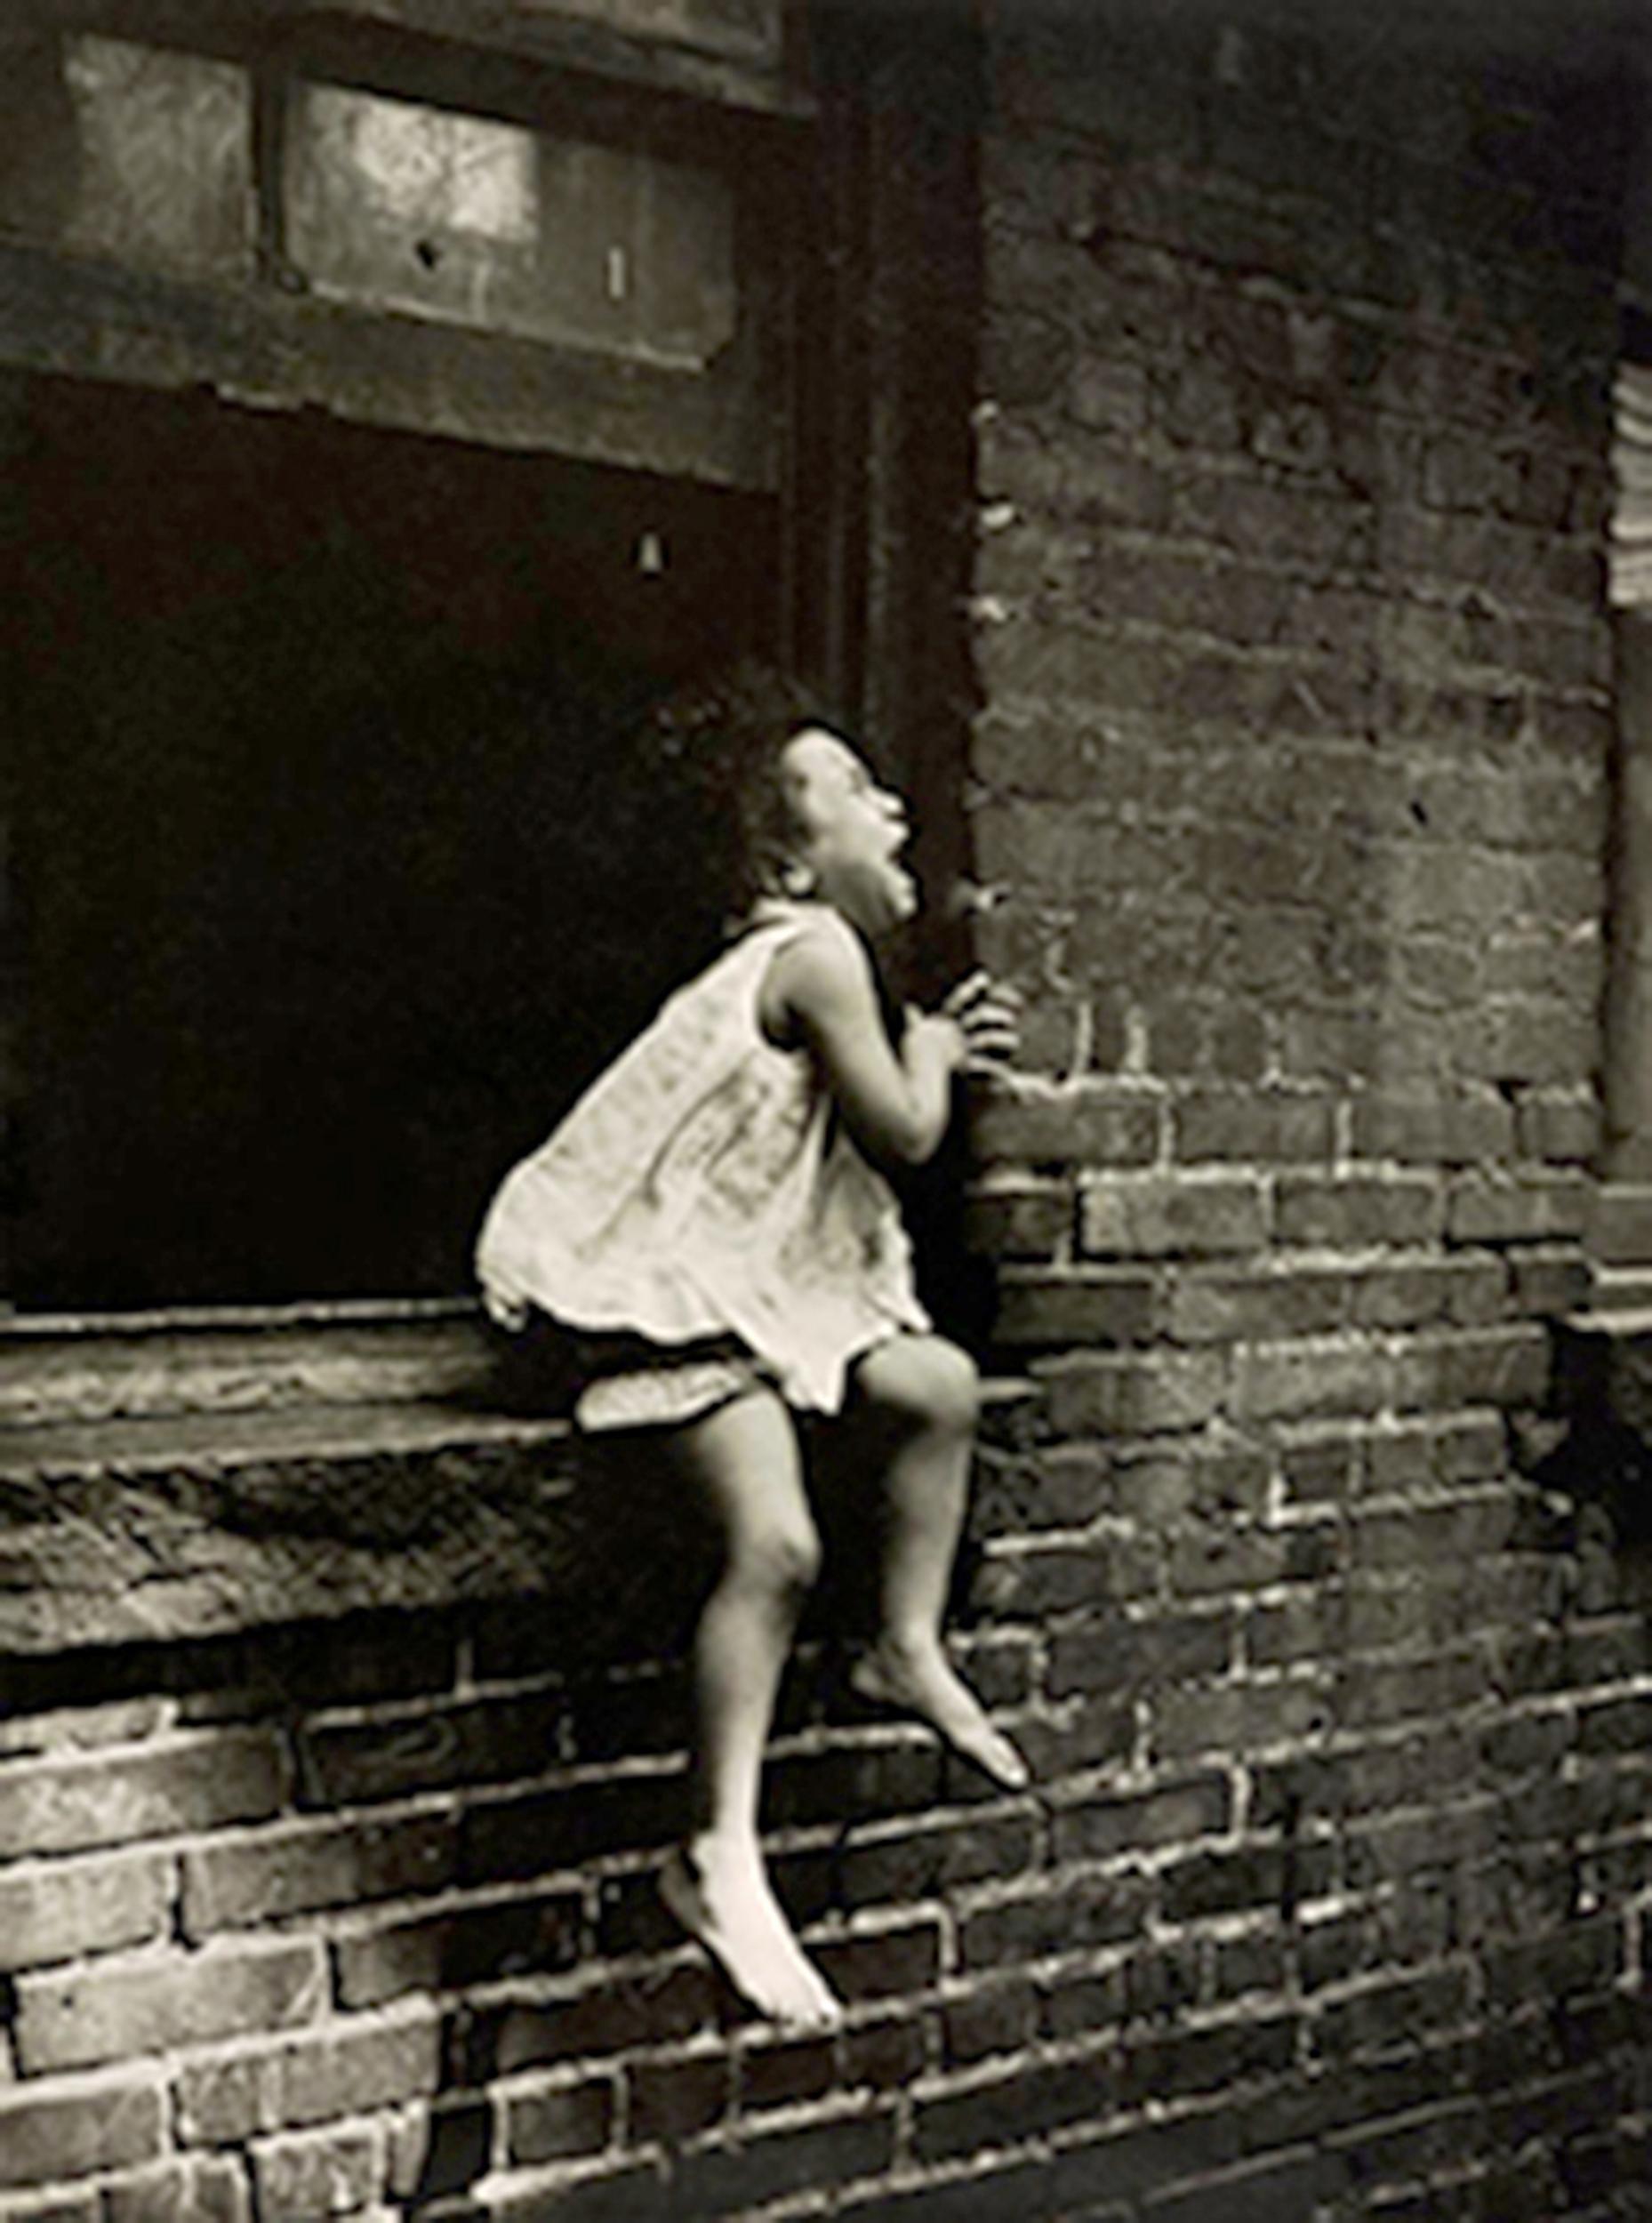 Child crying at a window in Manhattan, New York